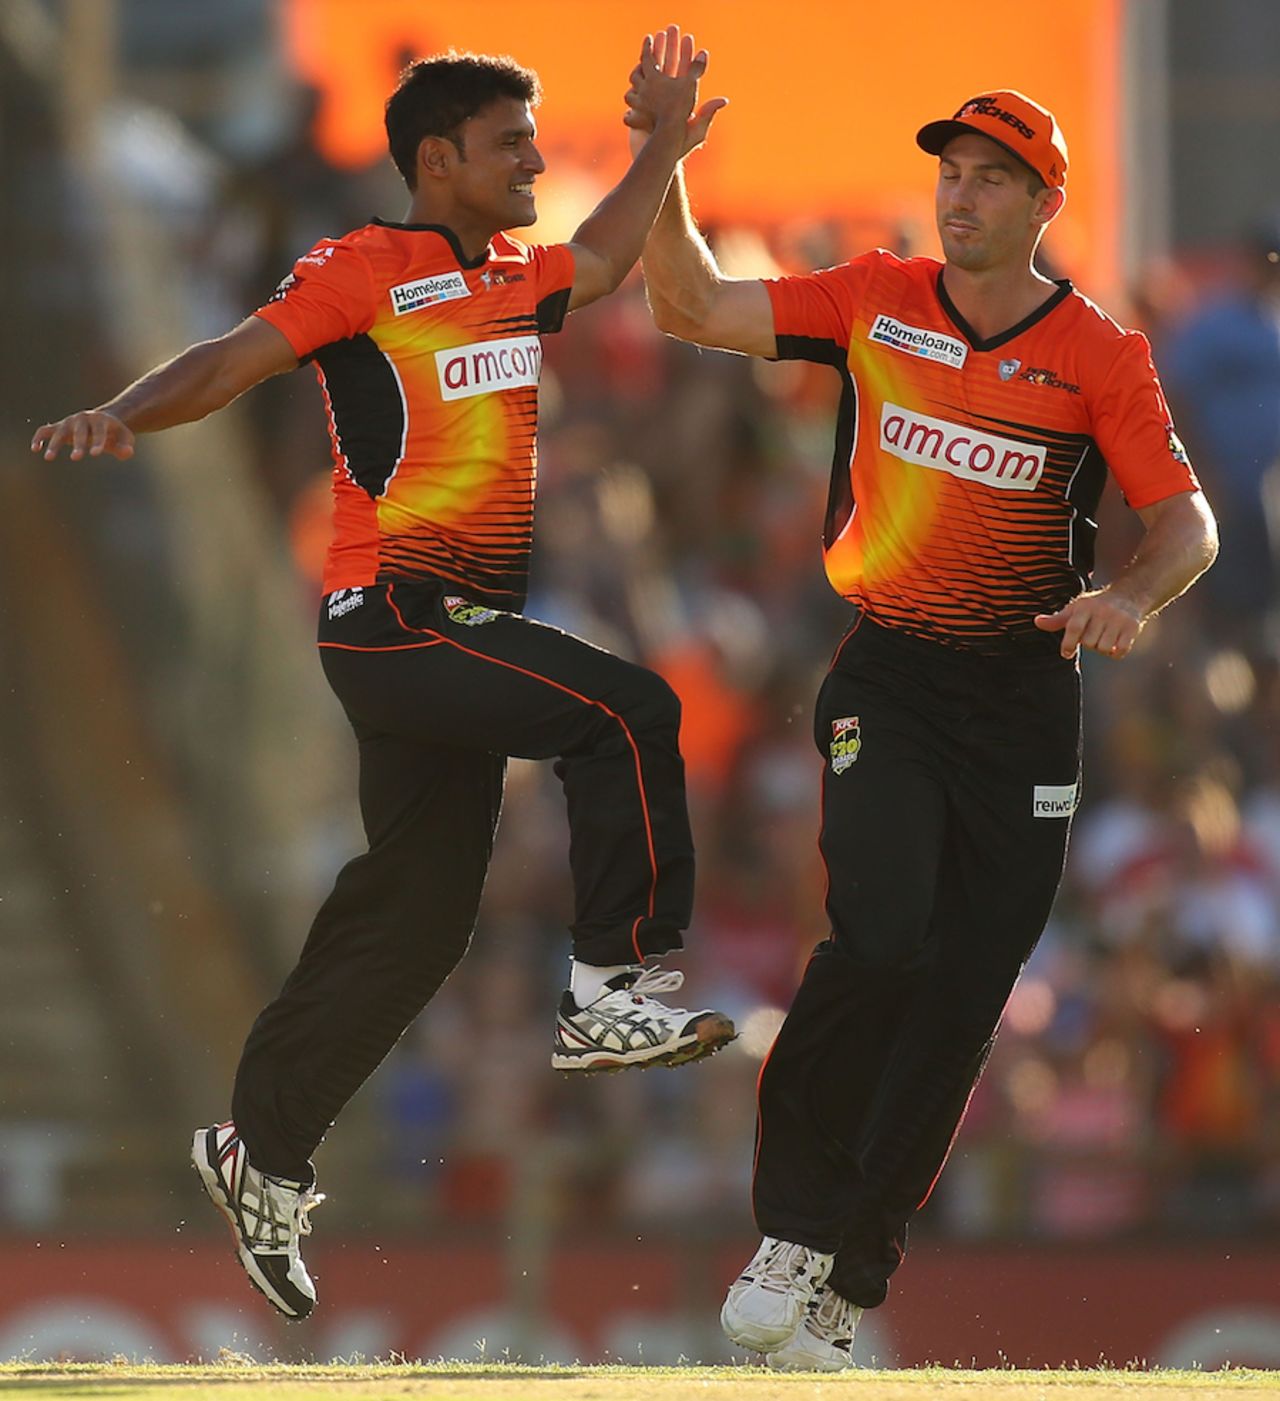 Yasir Arafat picked up two more wickets, Perth Scorchers v Melbourne Stars, Big Bash League 2014-15, semi-final, Perth, January 25, 2015